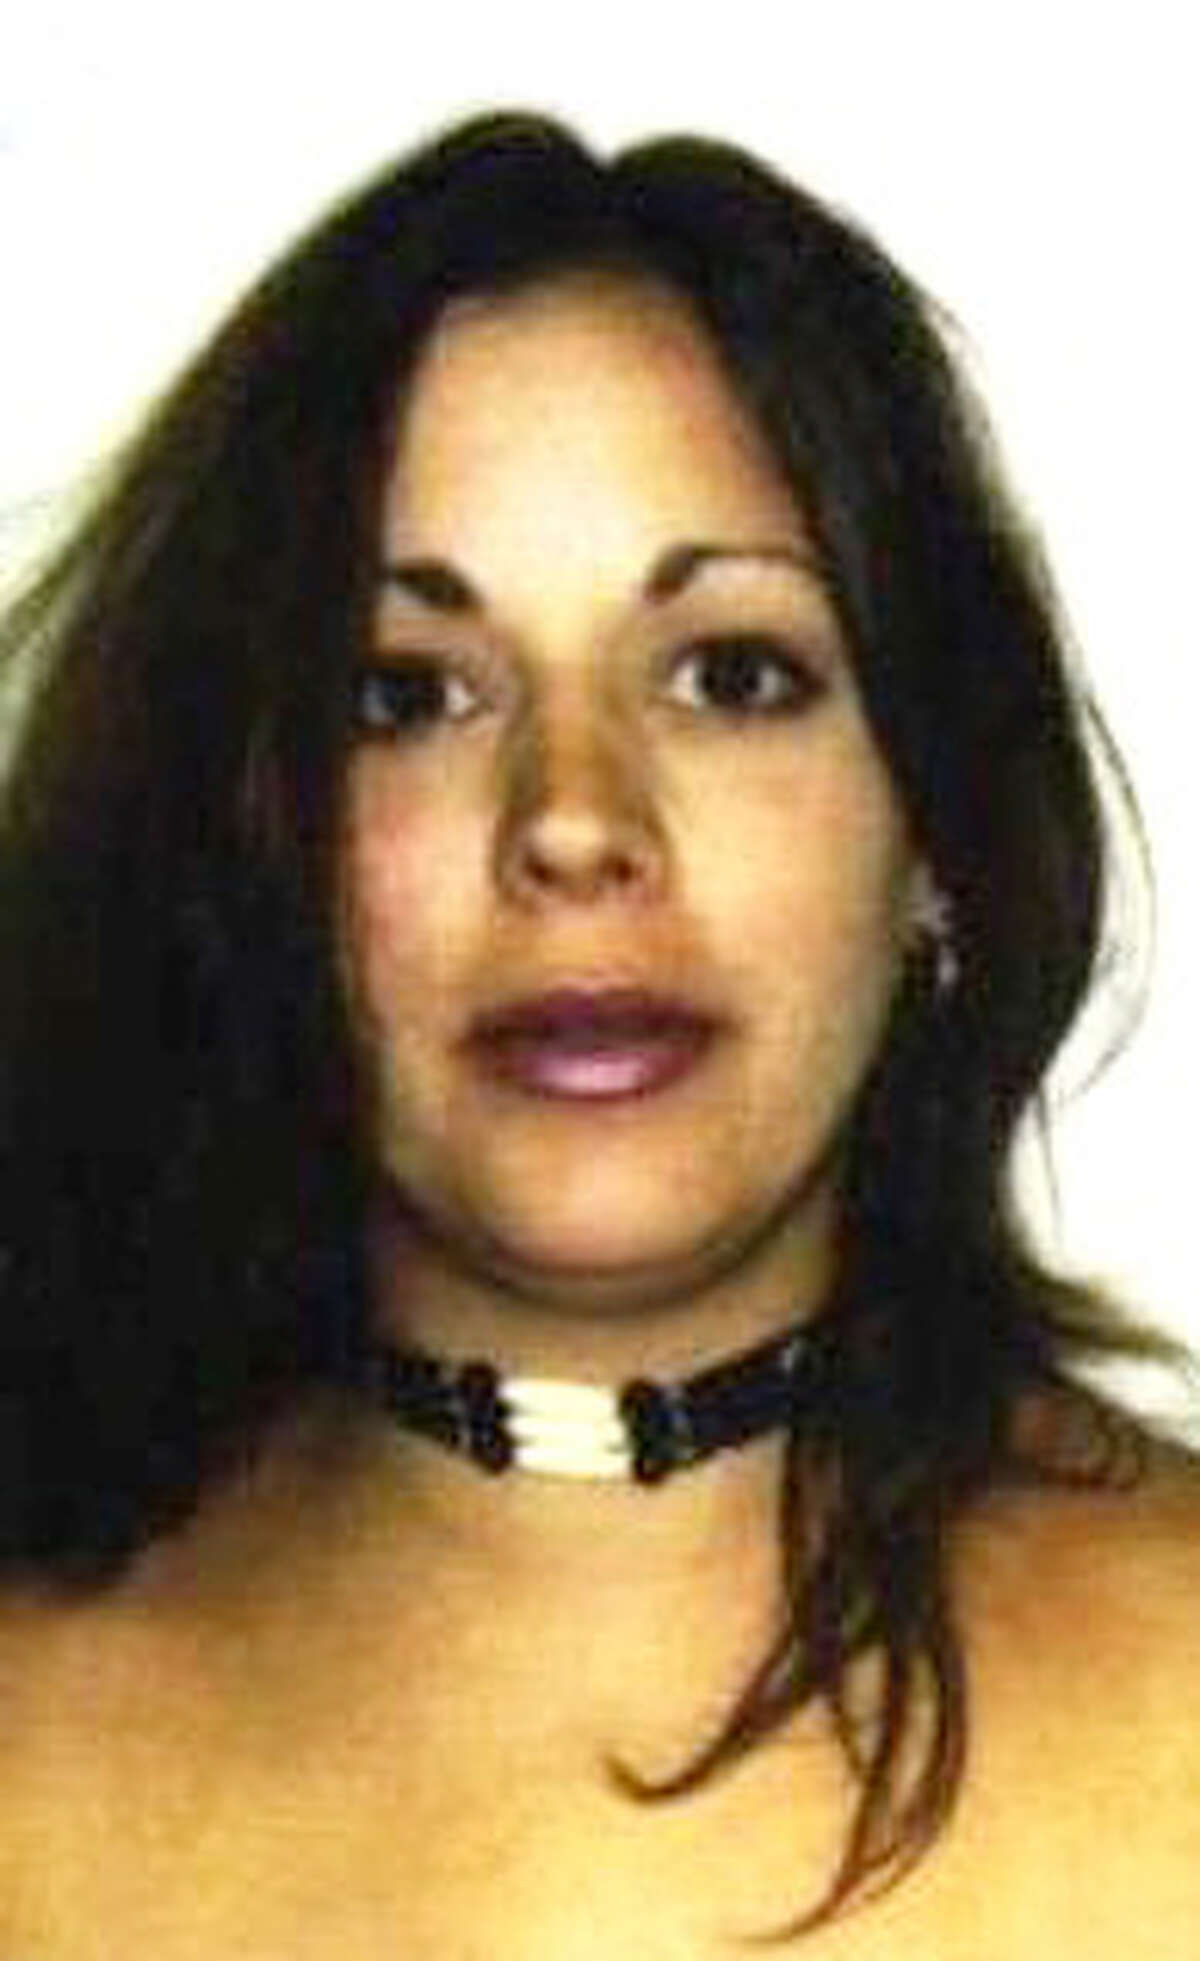 Melanie Camilini , a former Seymour, Conn. resident, disappeared in January 2003. Camilini was last seen in the Waterbury area with two males. She was living in the Waterbury area at the time, and left behind two small children.